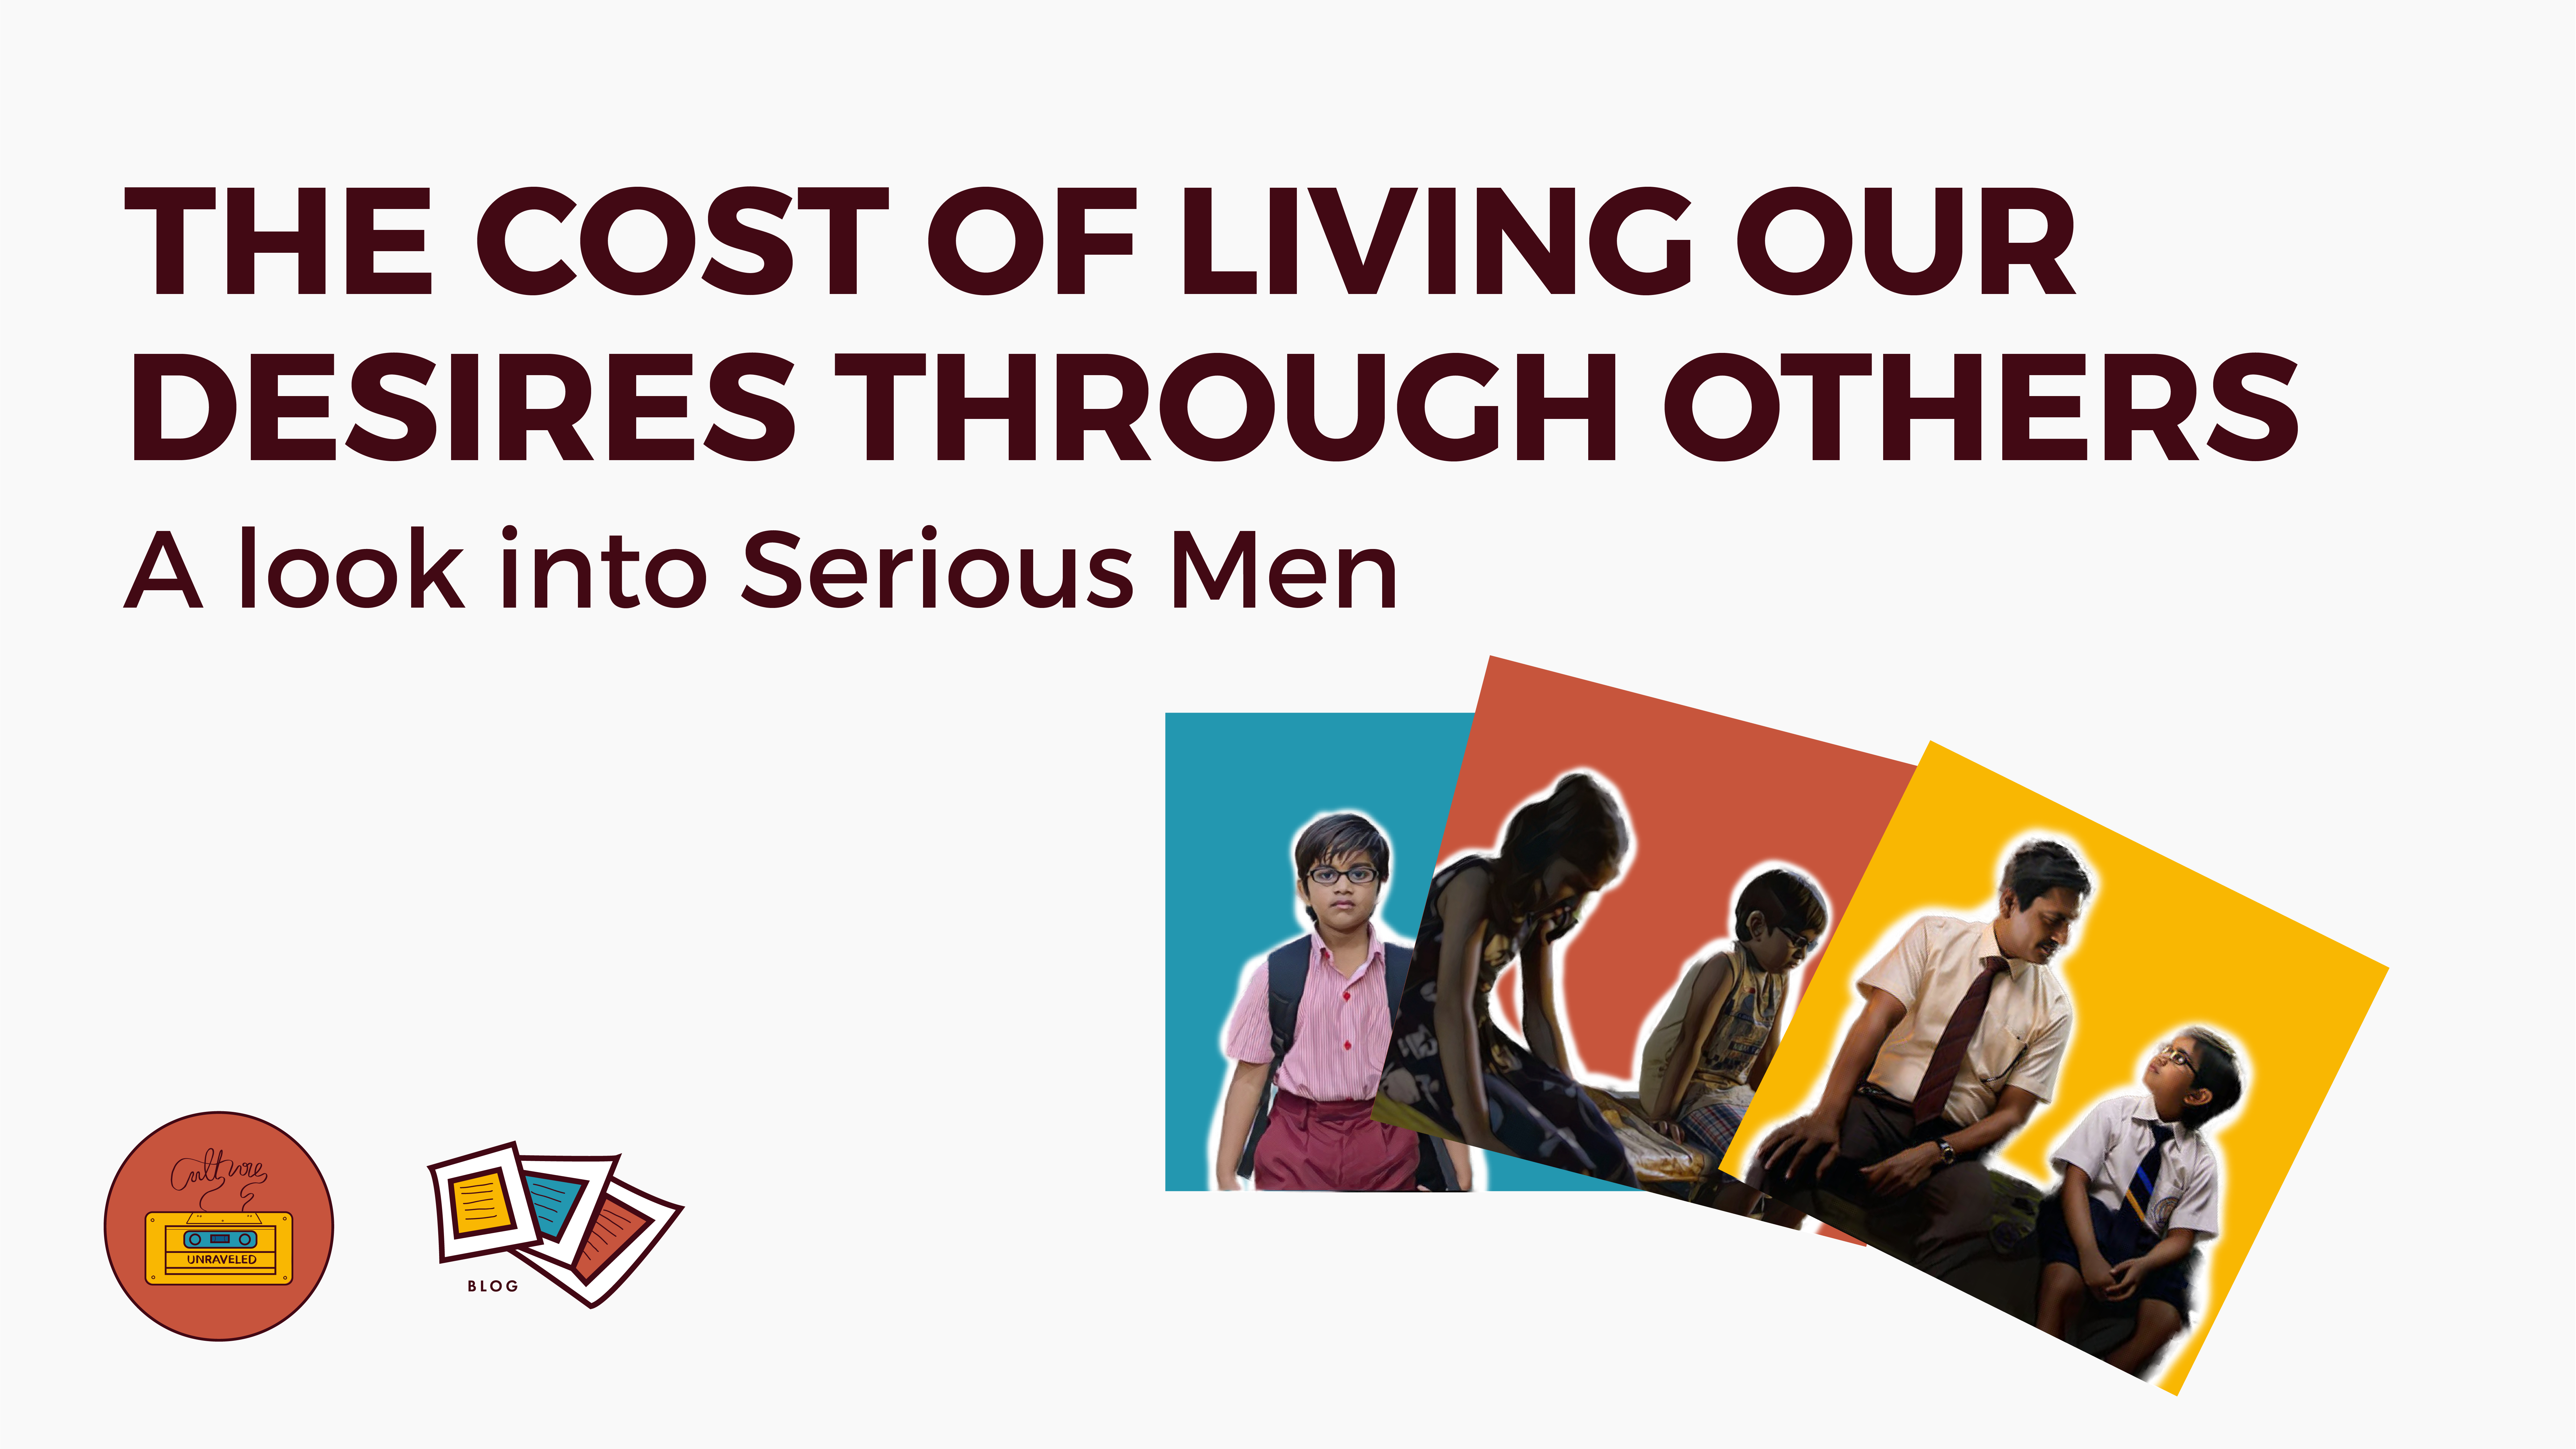 The Cost of Living our Desires through Others. A Look into Serious Men